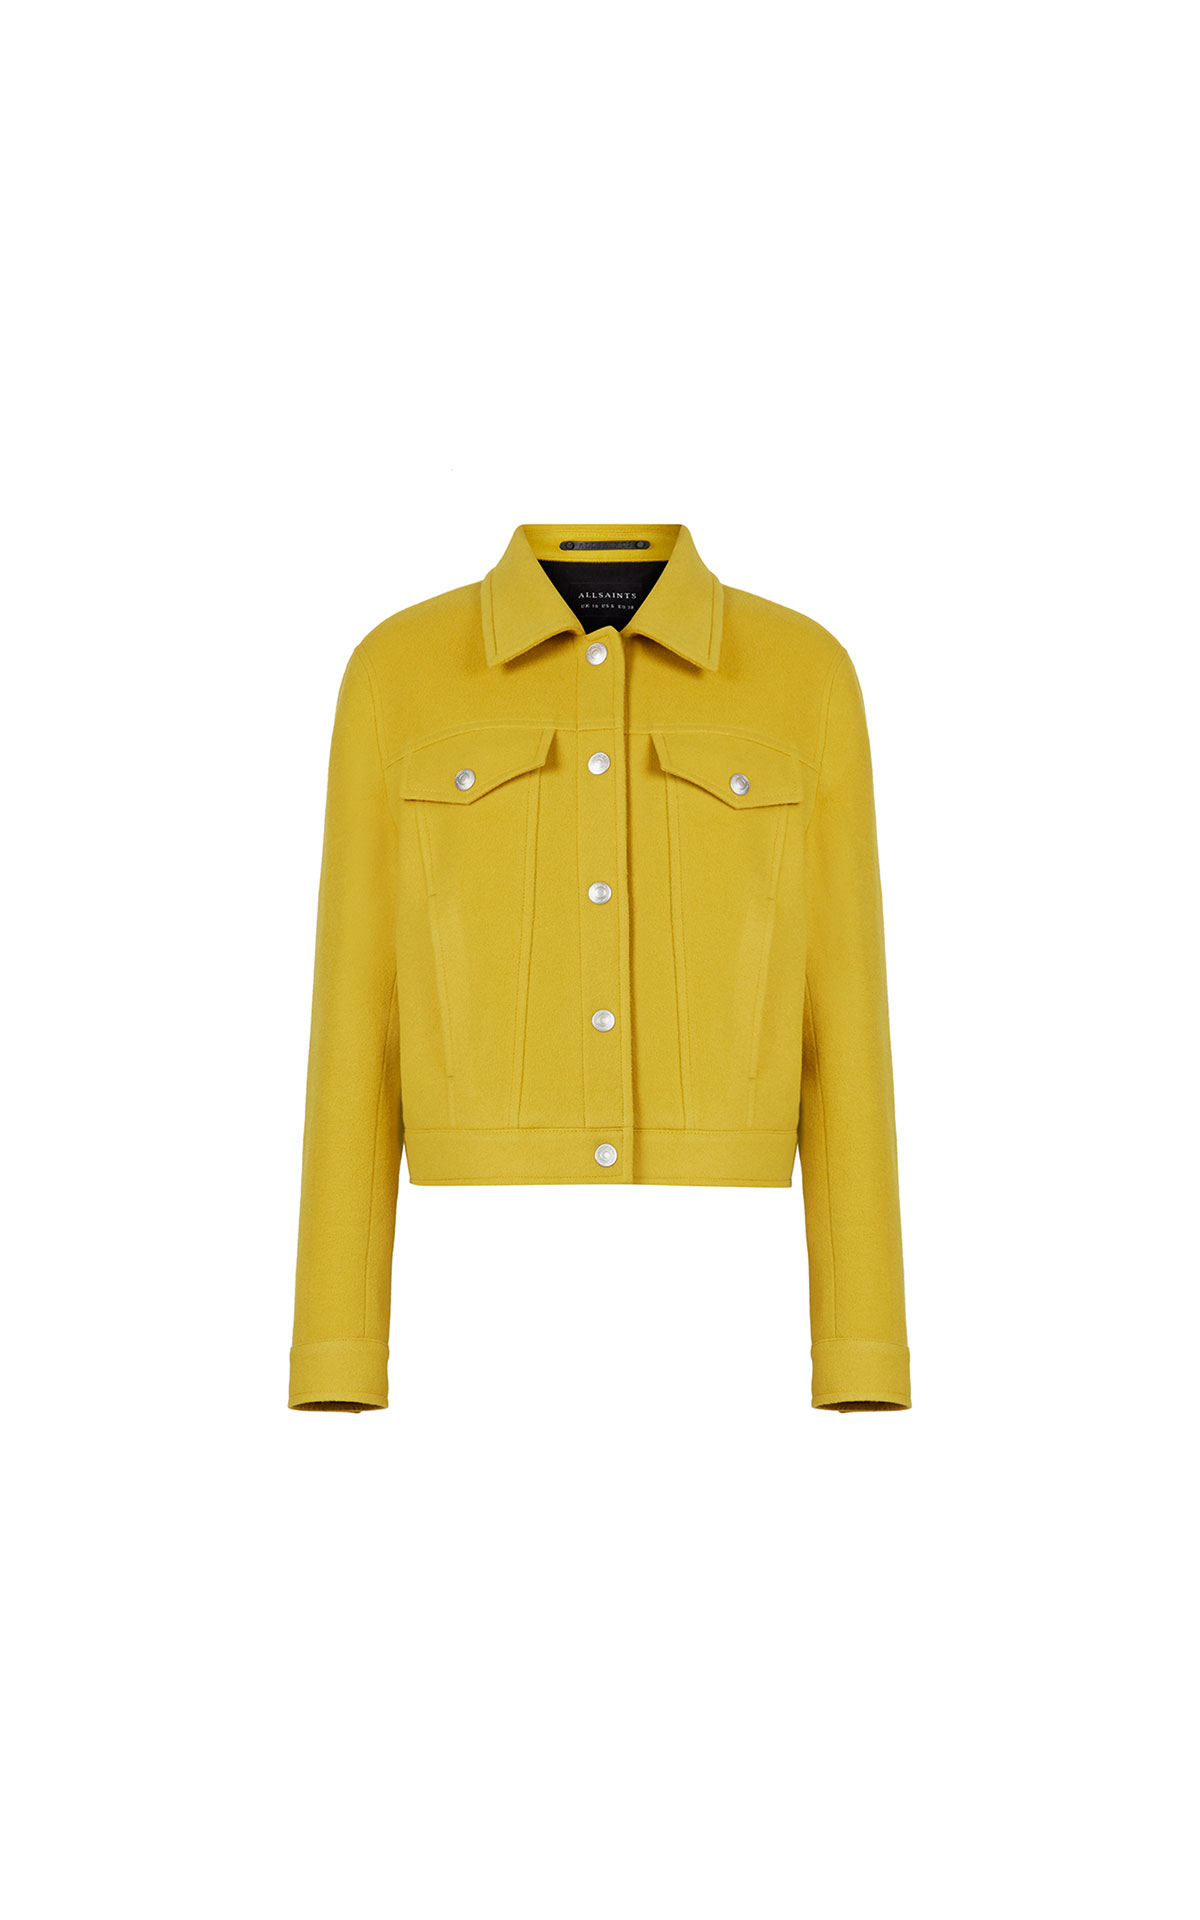 AllSaints Acey jacket chartreuse green from Bicester Village